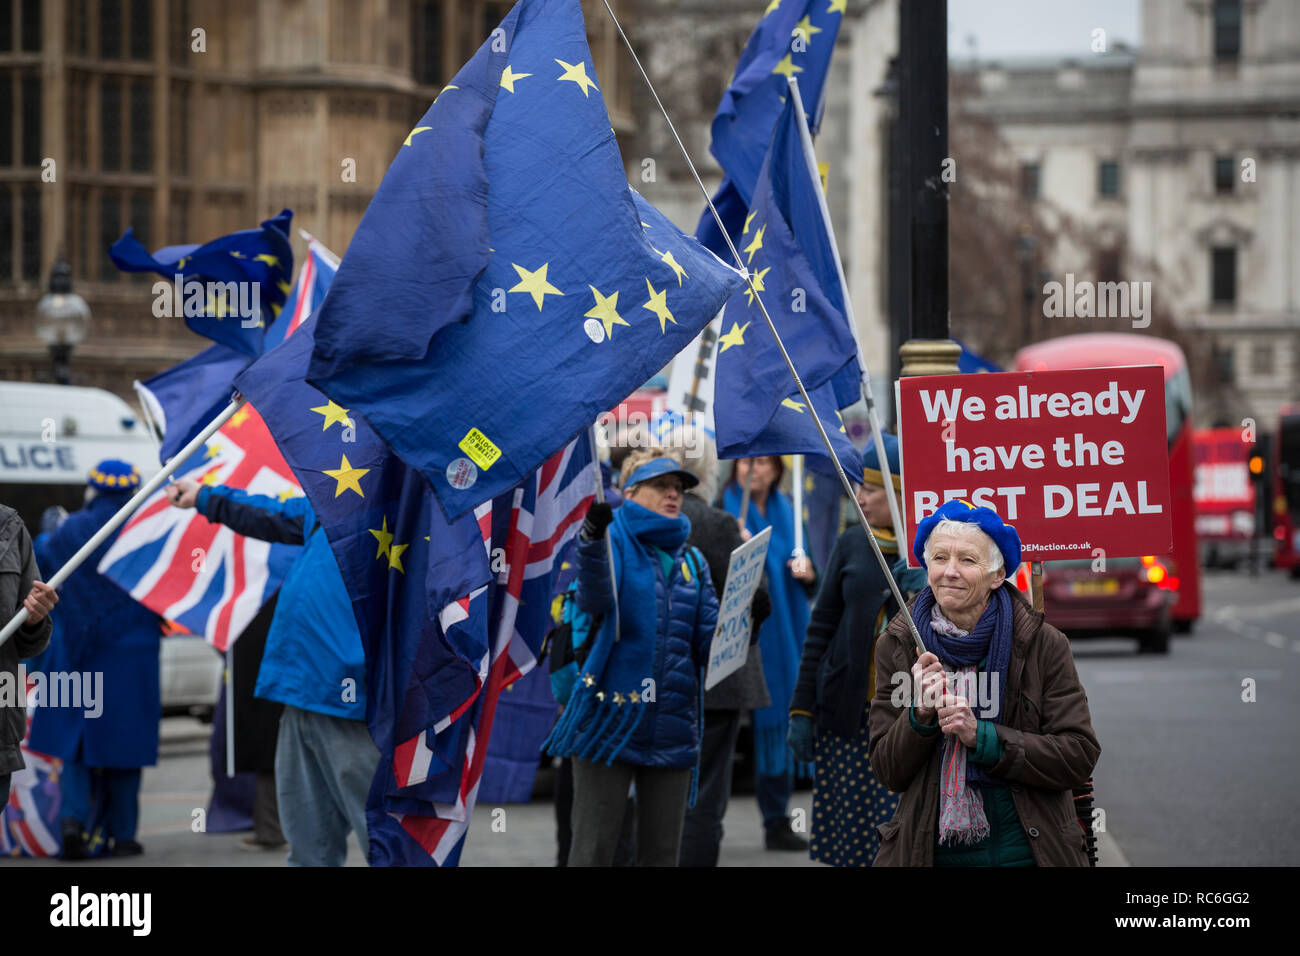 London, UK. 14th Jan 2019. Pro EU Remain supporters outside Houses of Parliament, London, UK 14th January 2019 Pro Remain suppoorters try to gather last ditch support against Brexit ahead of tomorrow's meaningful vote where Members of Parliament will approve or reject Theresa May's controversial plan. However, last month the prime minister dramatically called off the 'meaningful vote', in the face of what had been expected to be a significant defeat at the hands of rebel MPs. Credit: Jeff Gilbert/Alamy Live News Stock Photo